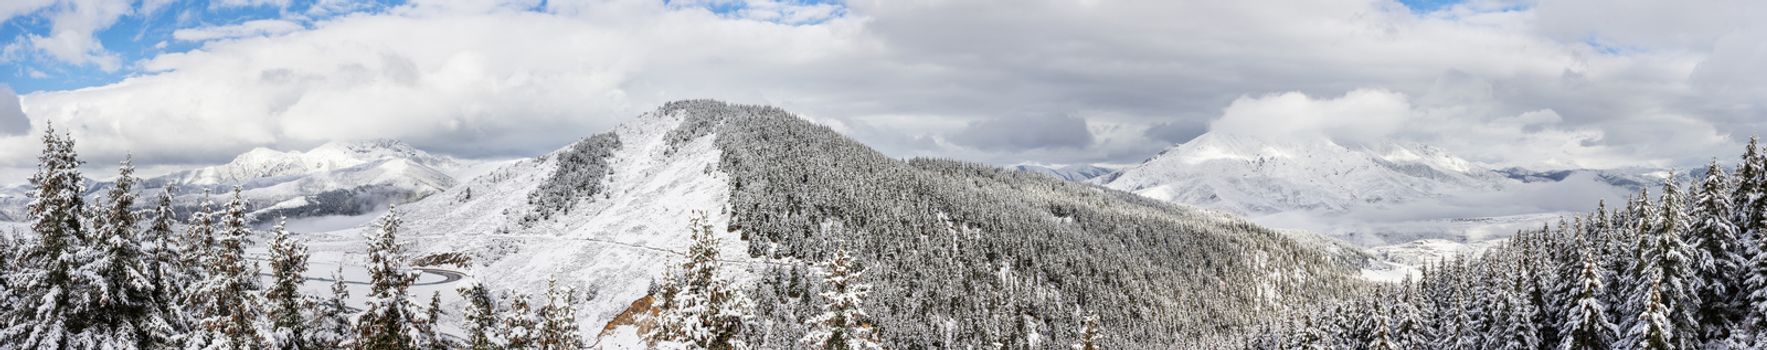 panorama spruce forest around mountain in winter covered by snow day scenic